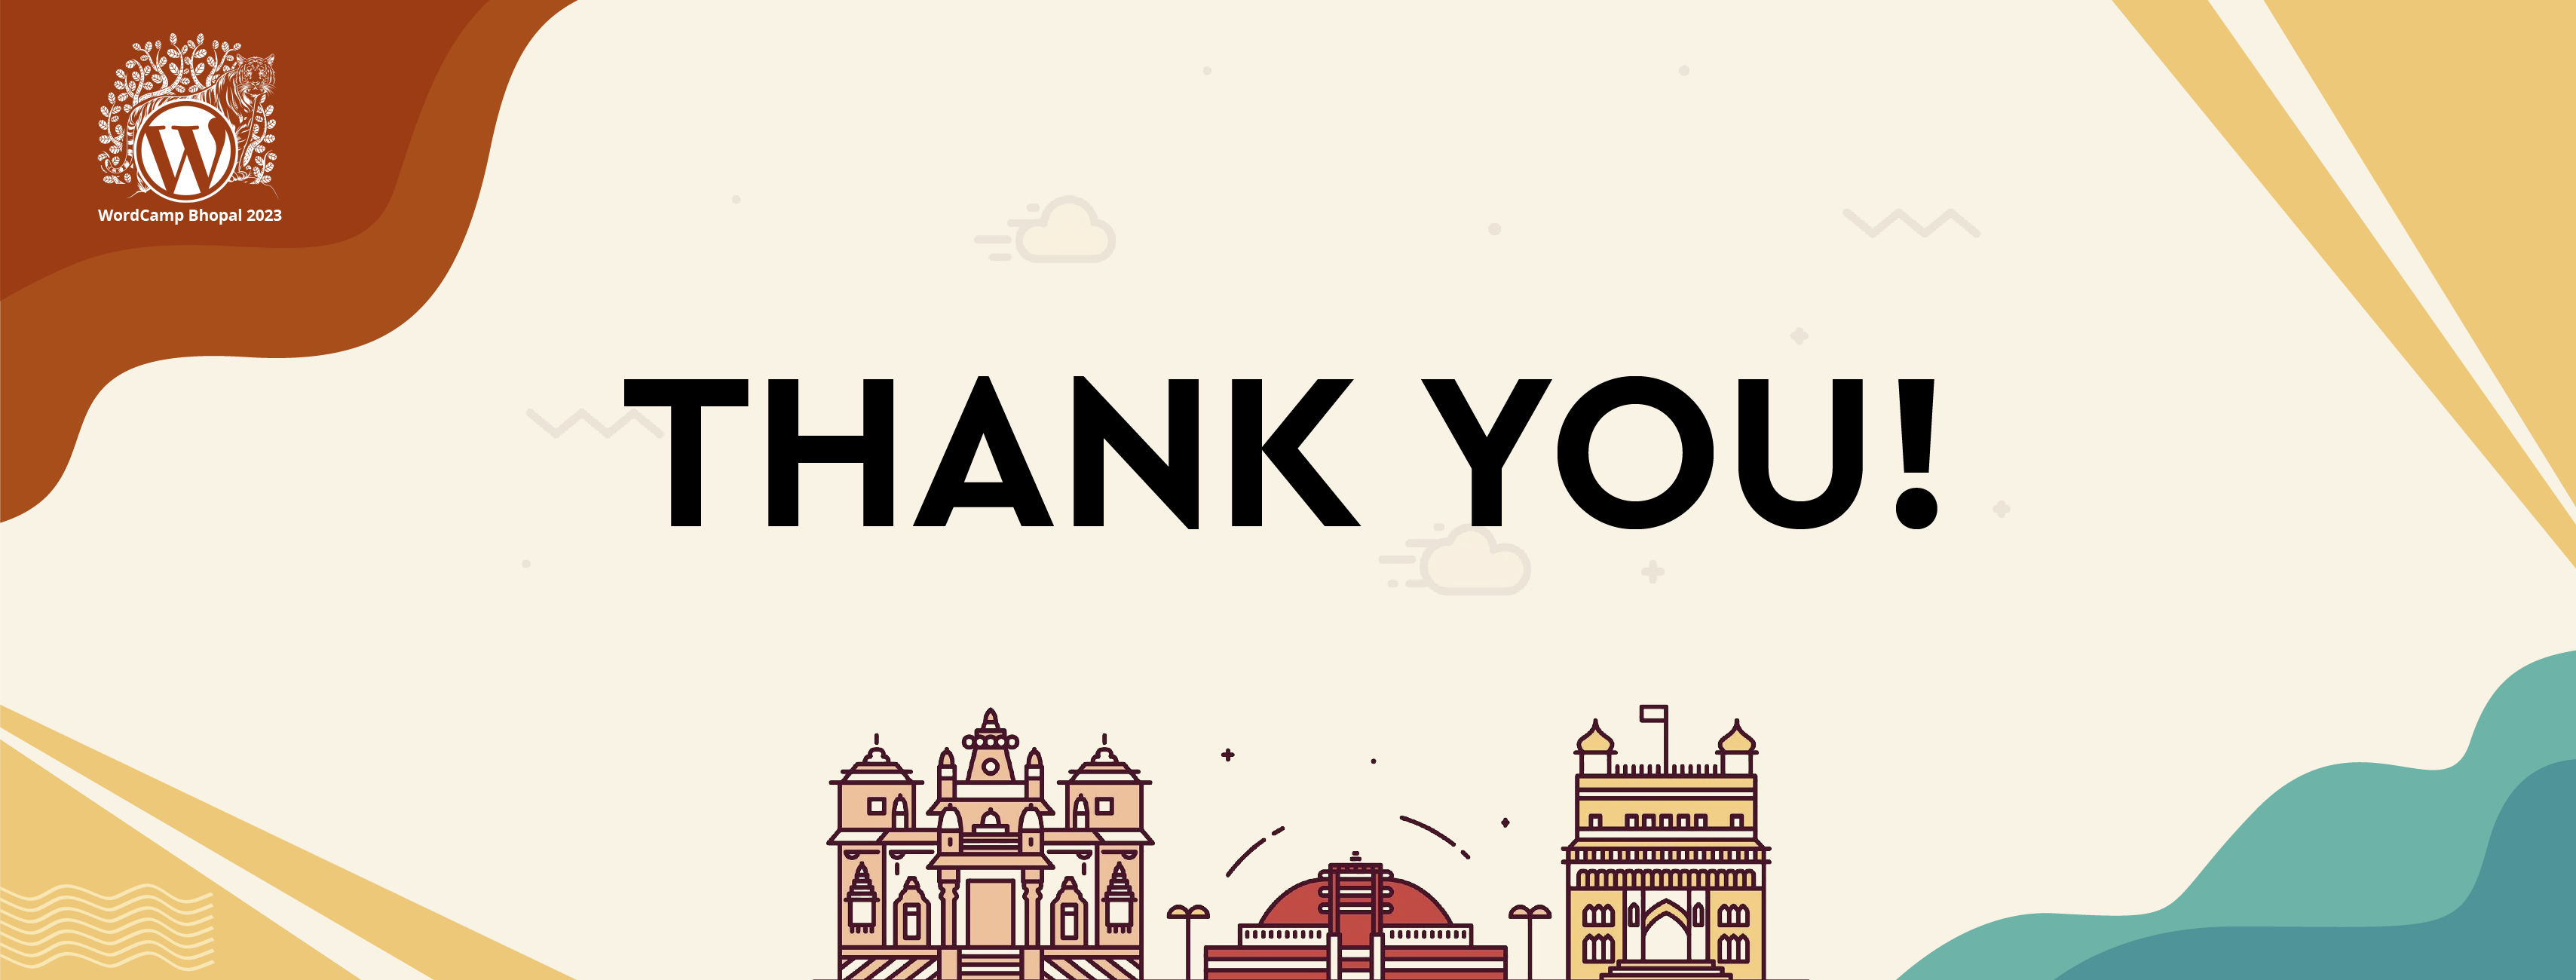 Cheers to the Success of WordCamp Bhopal 2023: A Heartfelt Thank You!